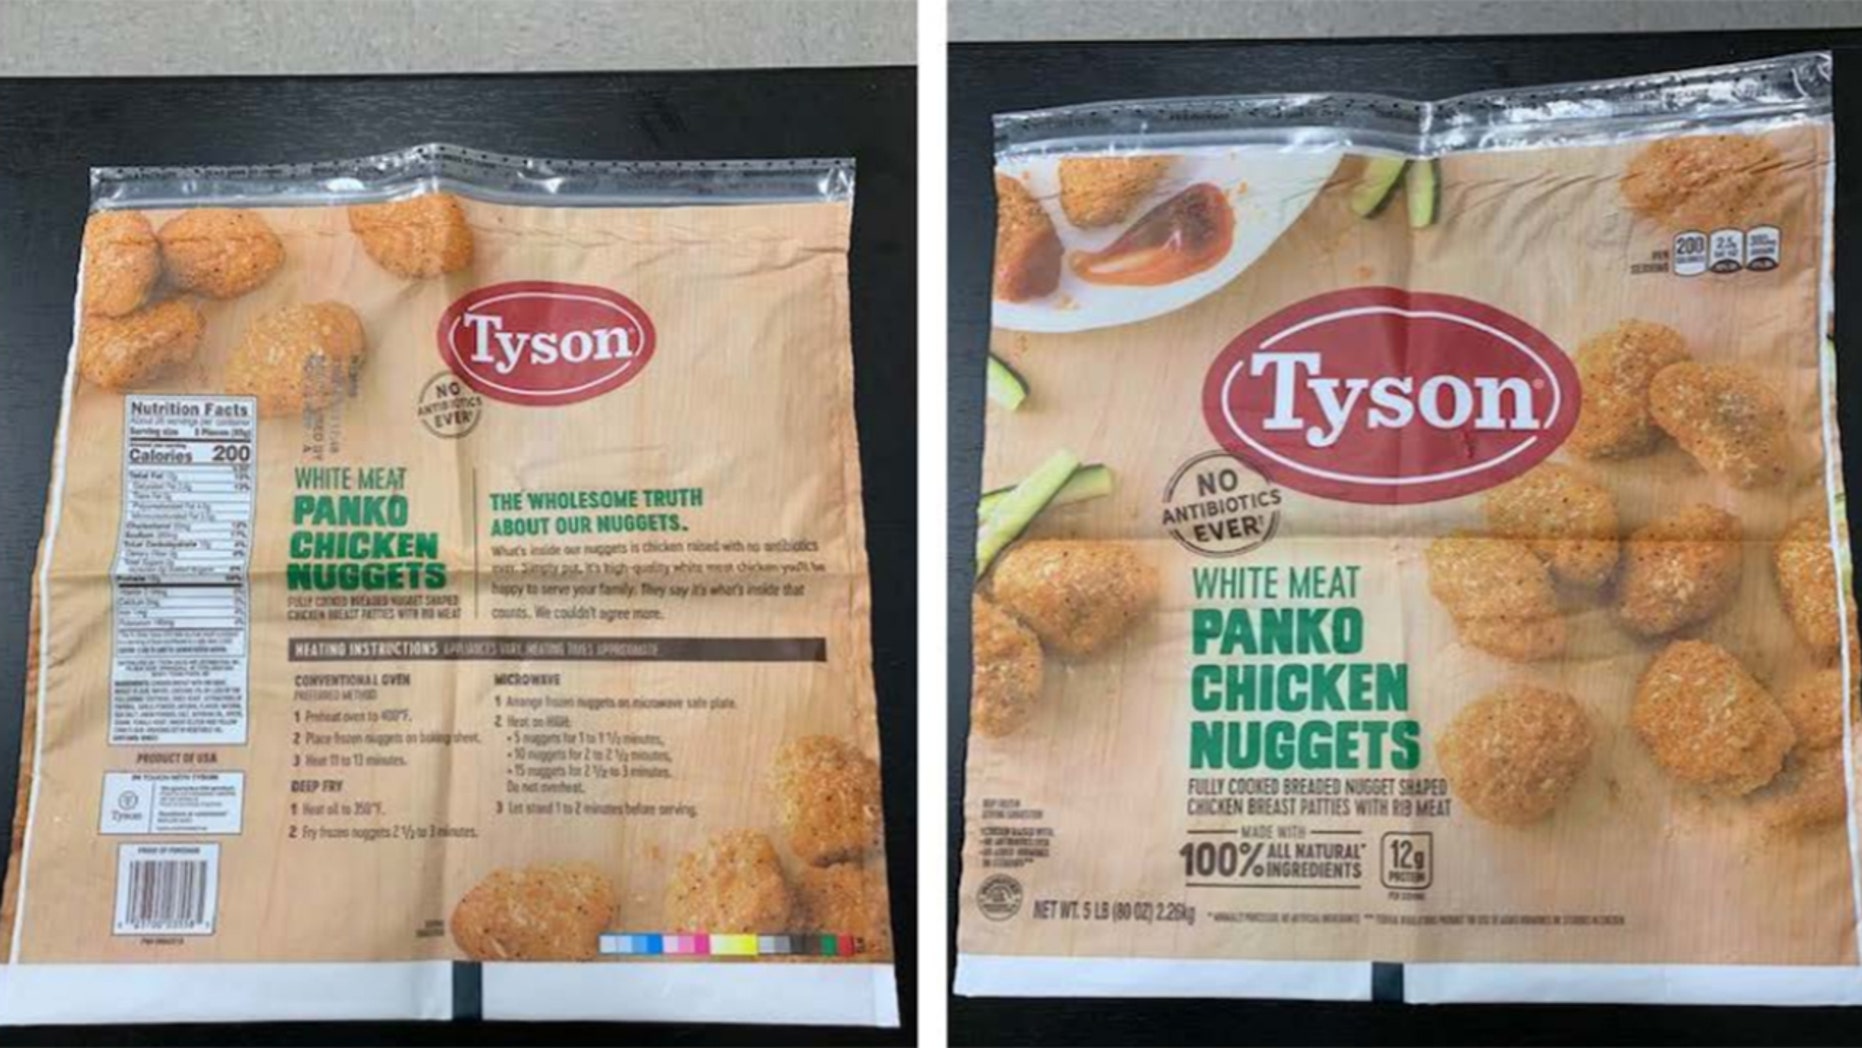 Tyson recalls 36,000 pounds of chicken nuggets after complaints about